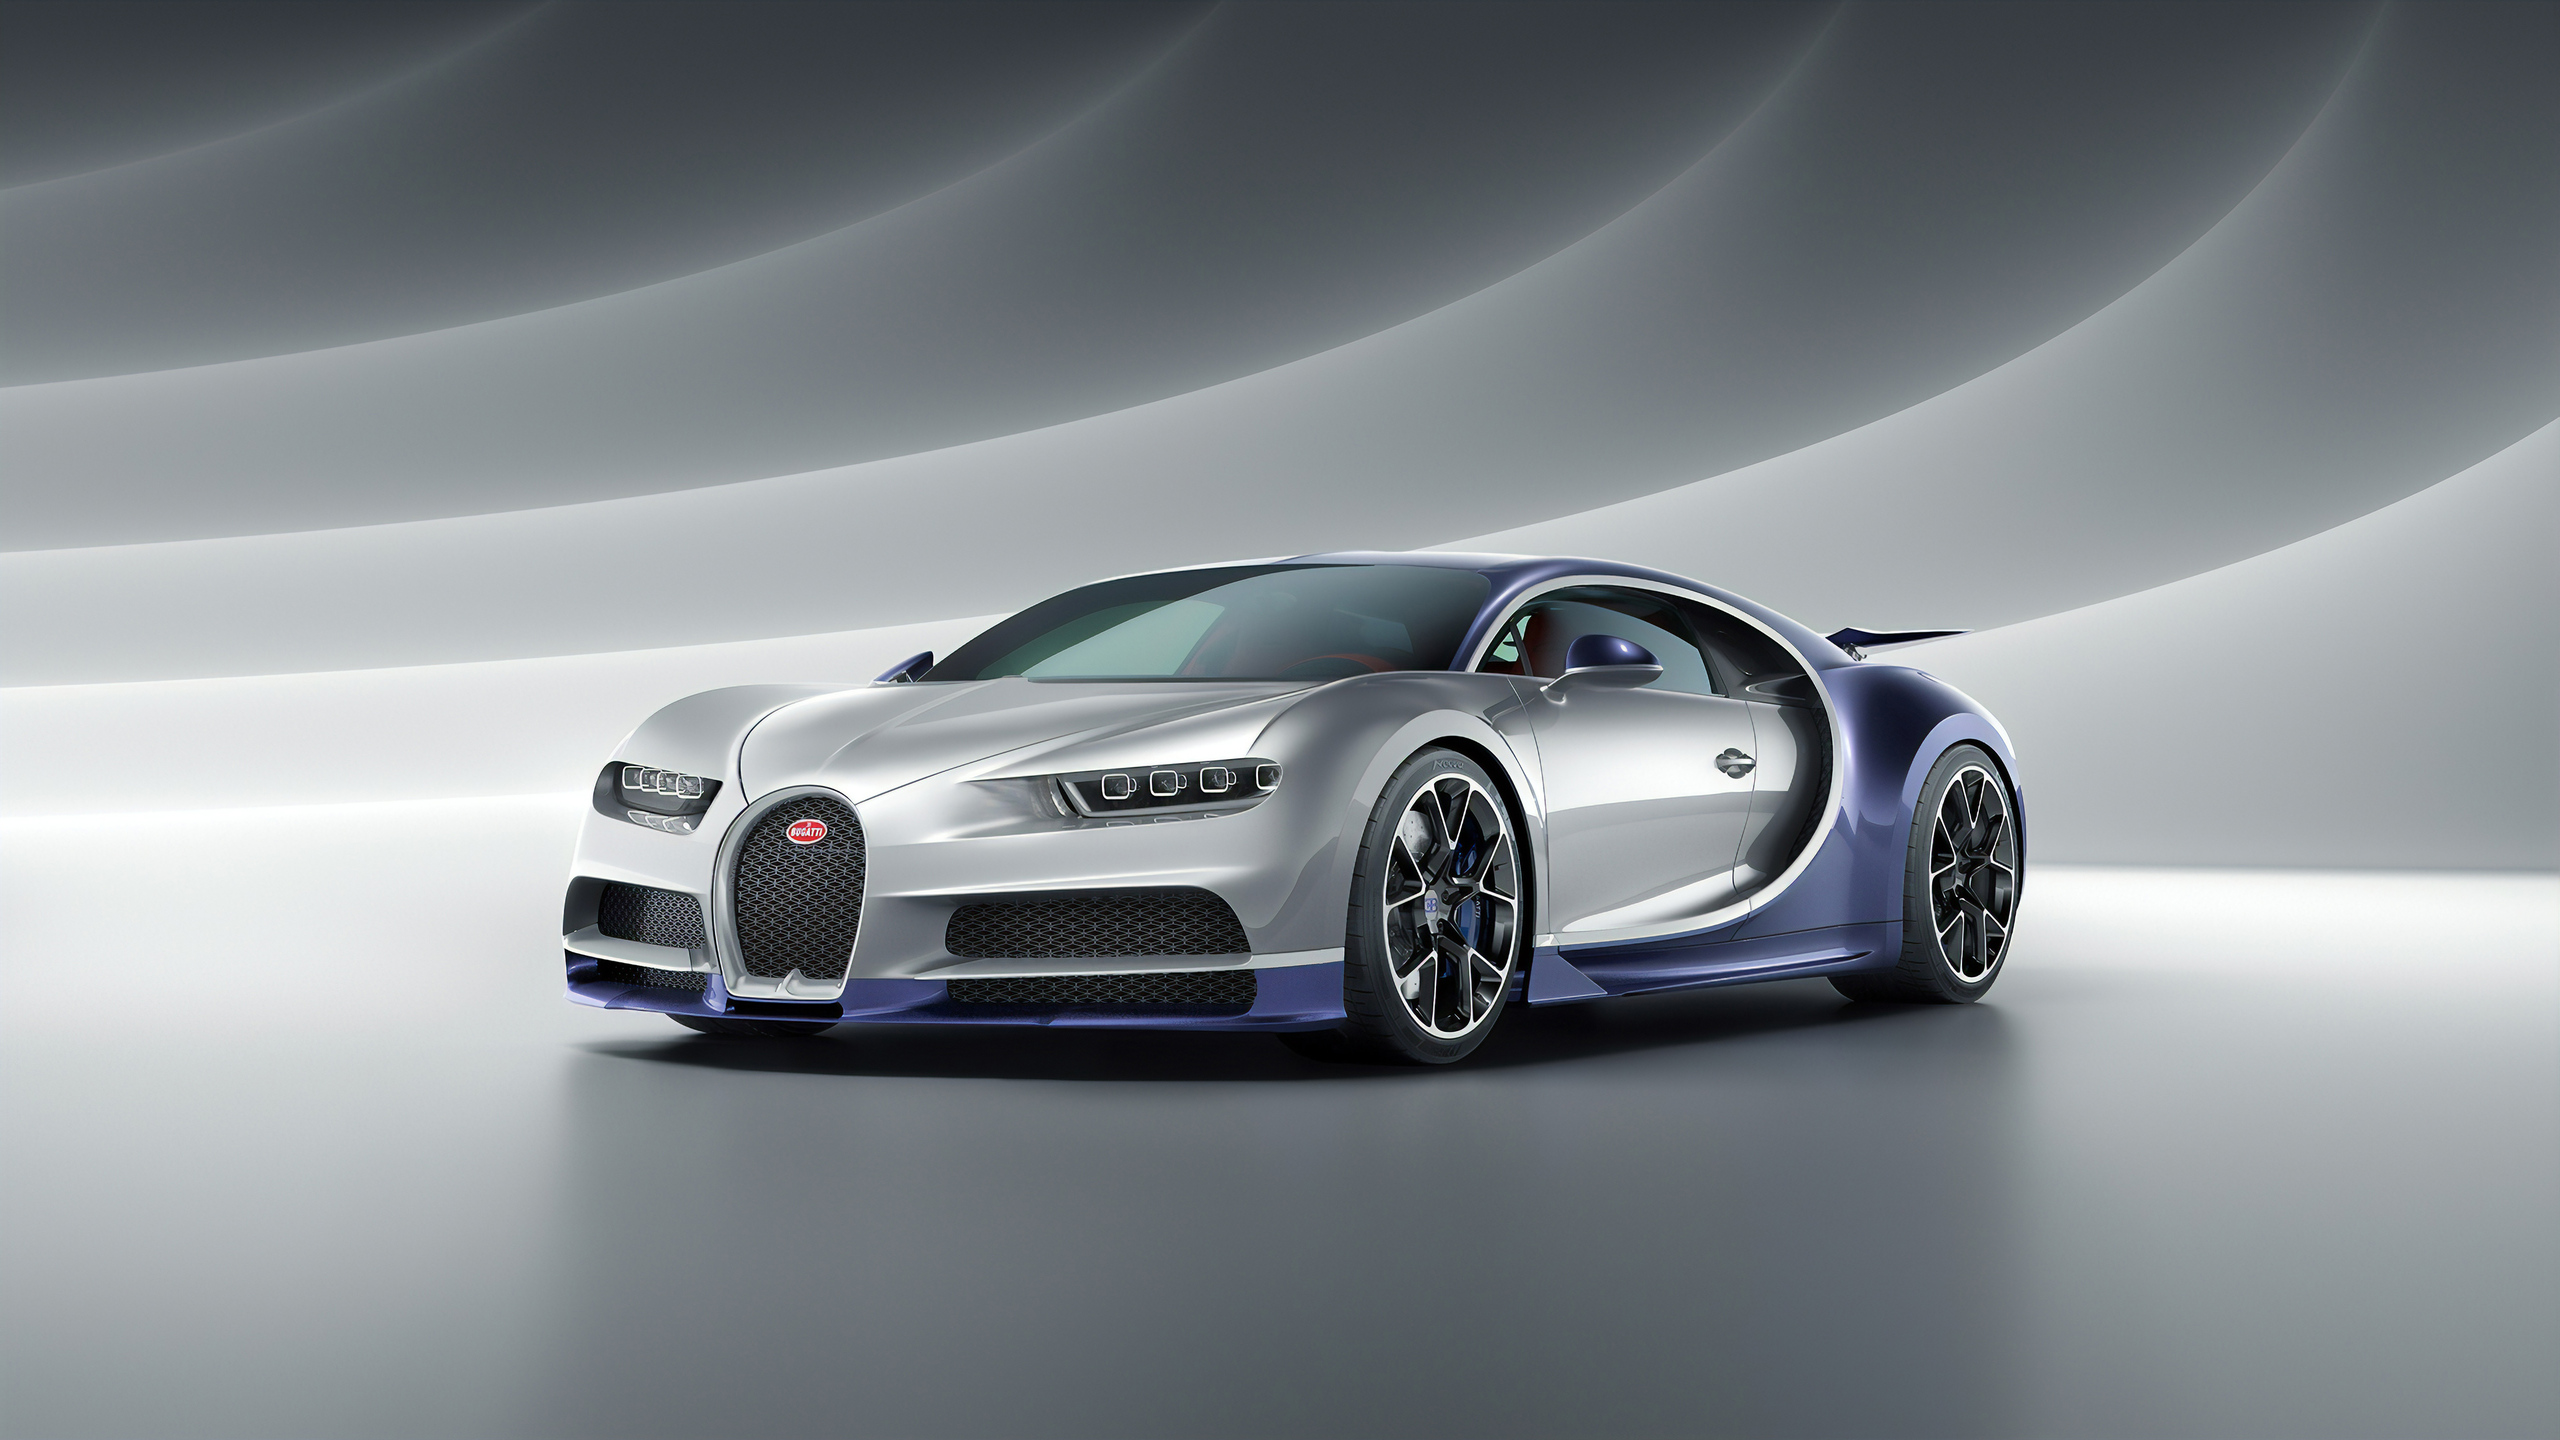 2560x1440 Bugatti Sport Car 1440p Resolution Hd 4k Wallpapers Images Backgrounds Photos And Pictures